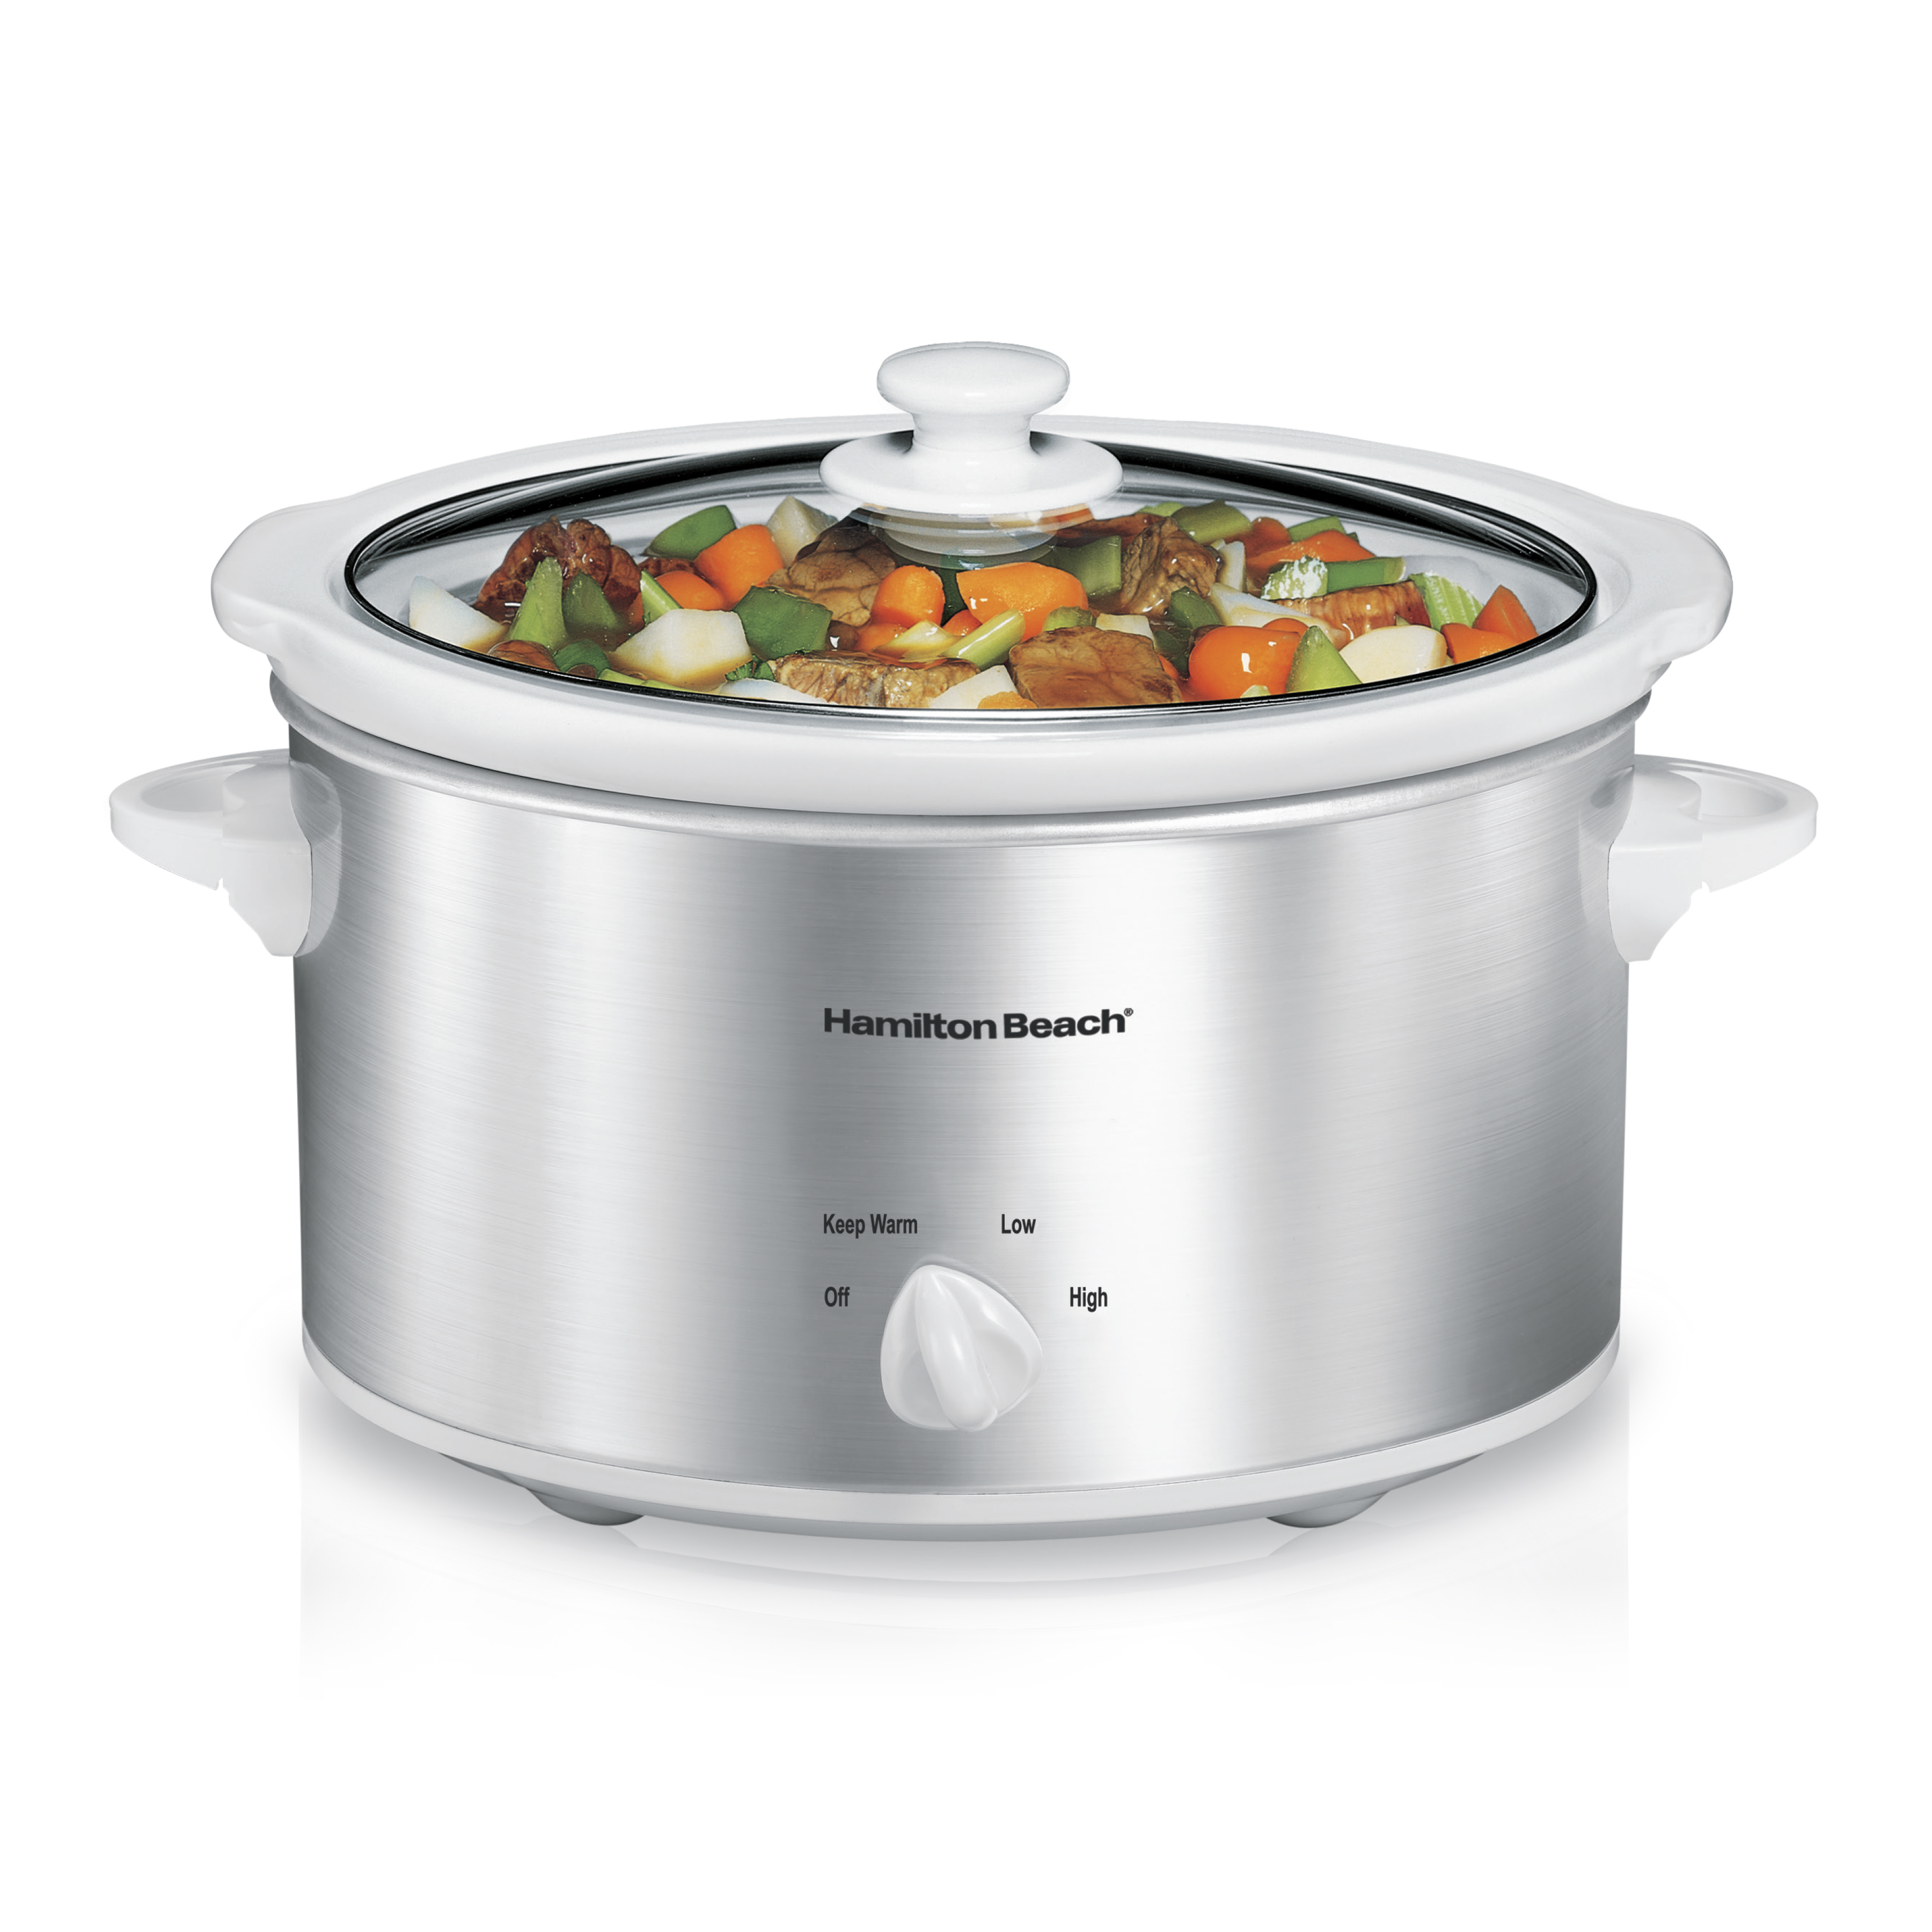 Hamilton Beach Slow Cooker, 4 Quart Capacity, Serves 4+ People, Removable Crock, White and Silver, 33140 - image 1 of 8